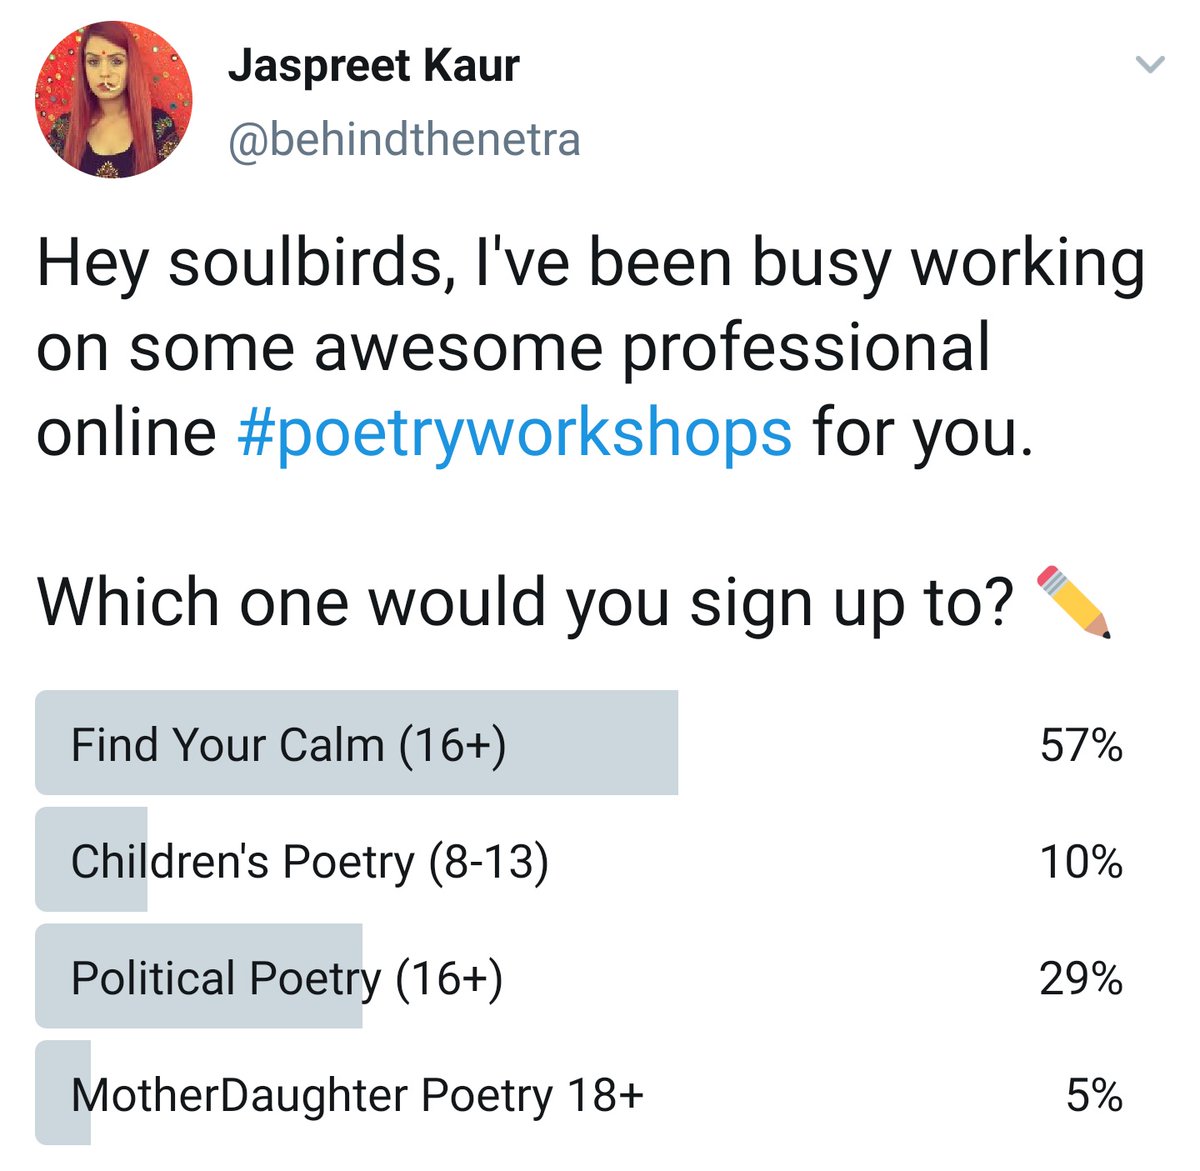 Thank you Insta and Twitter users for the feedback on what online #poetryworkshop you'd be keen to attend. Looks like writing to 'Find Your Calm' is the main need right now..

N.B. interesting that Twitter users were more eager for Political Poetry 😅

More soon!